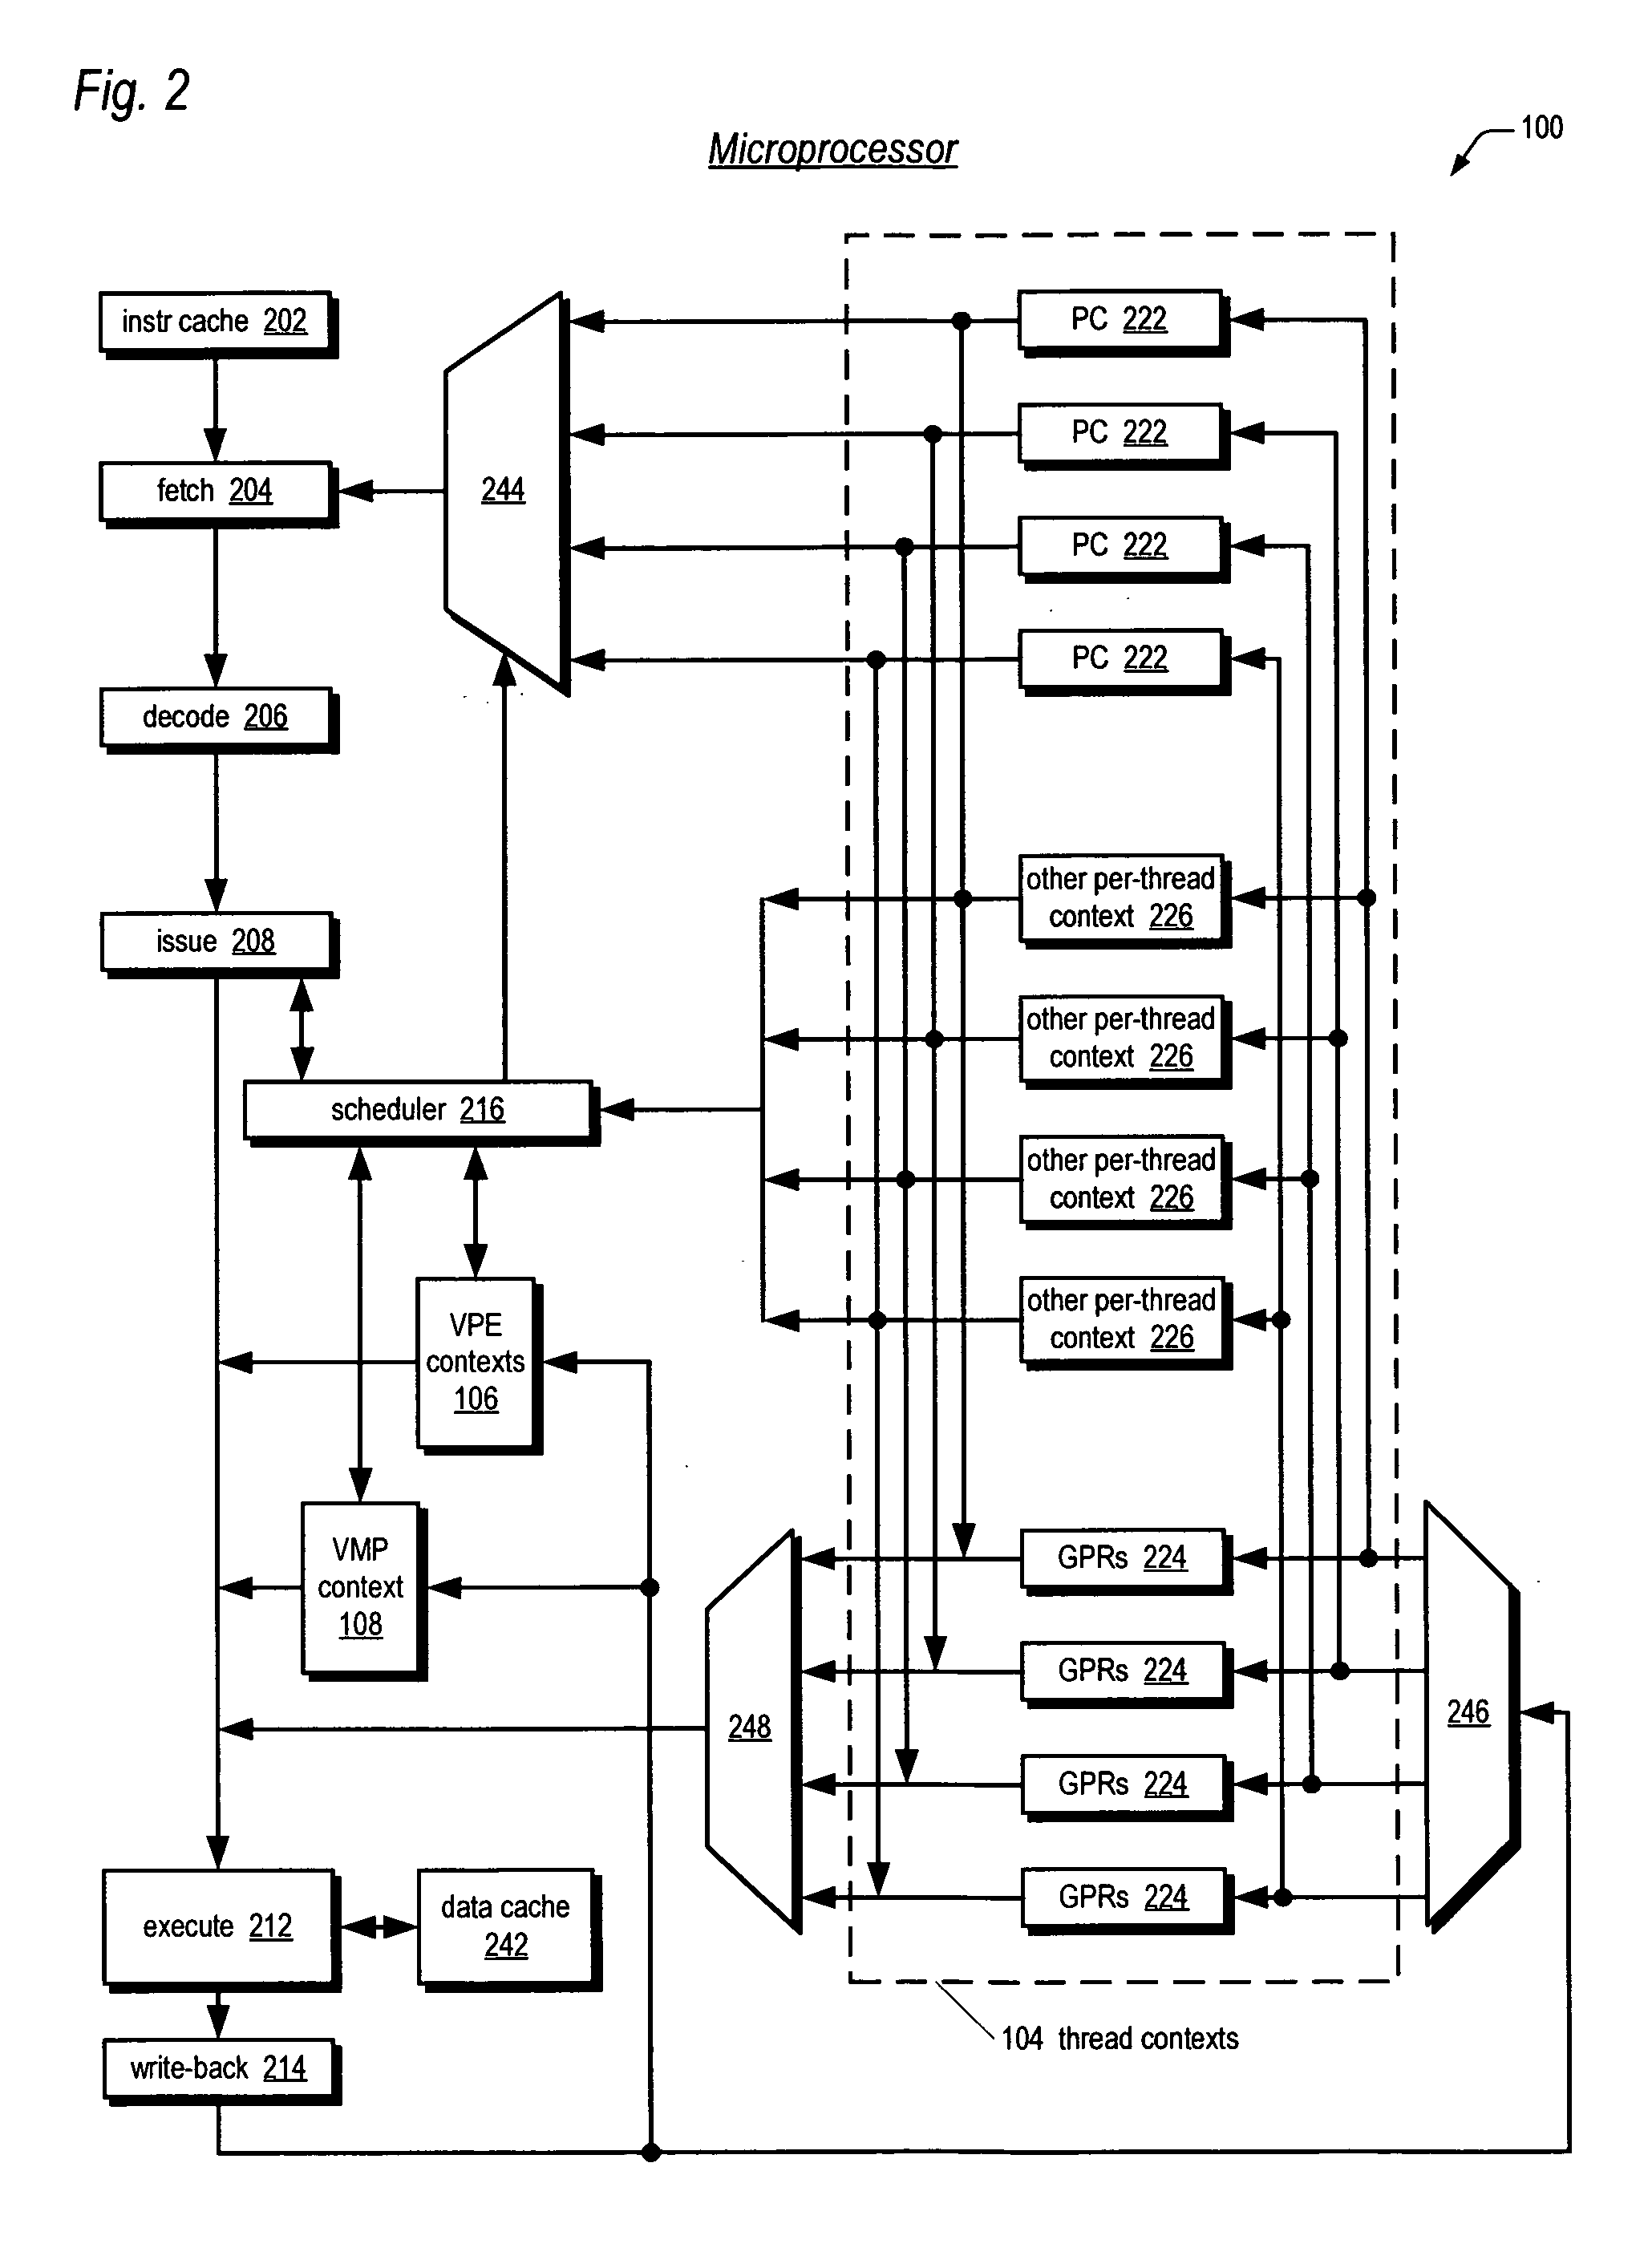 Symmetric multiprocessor operating system for execution on non-independent lightweight thread context